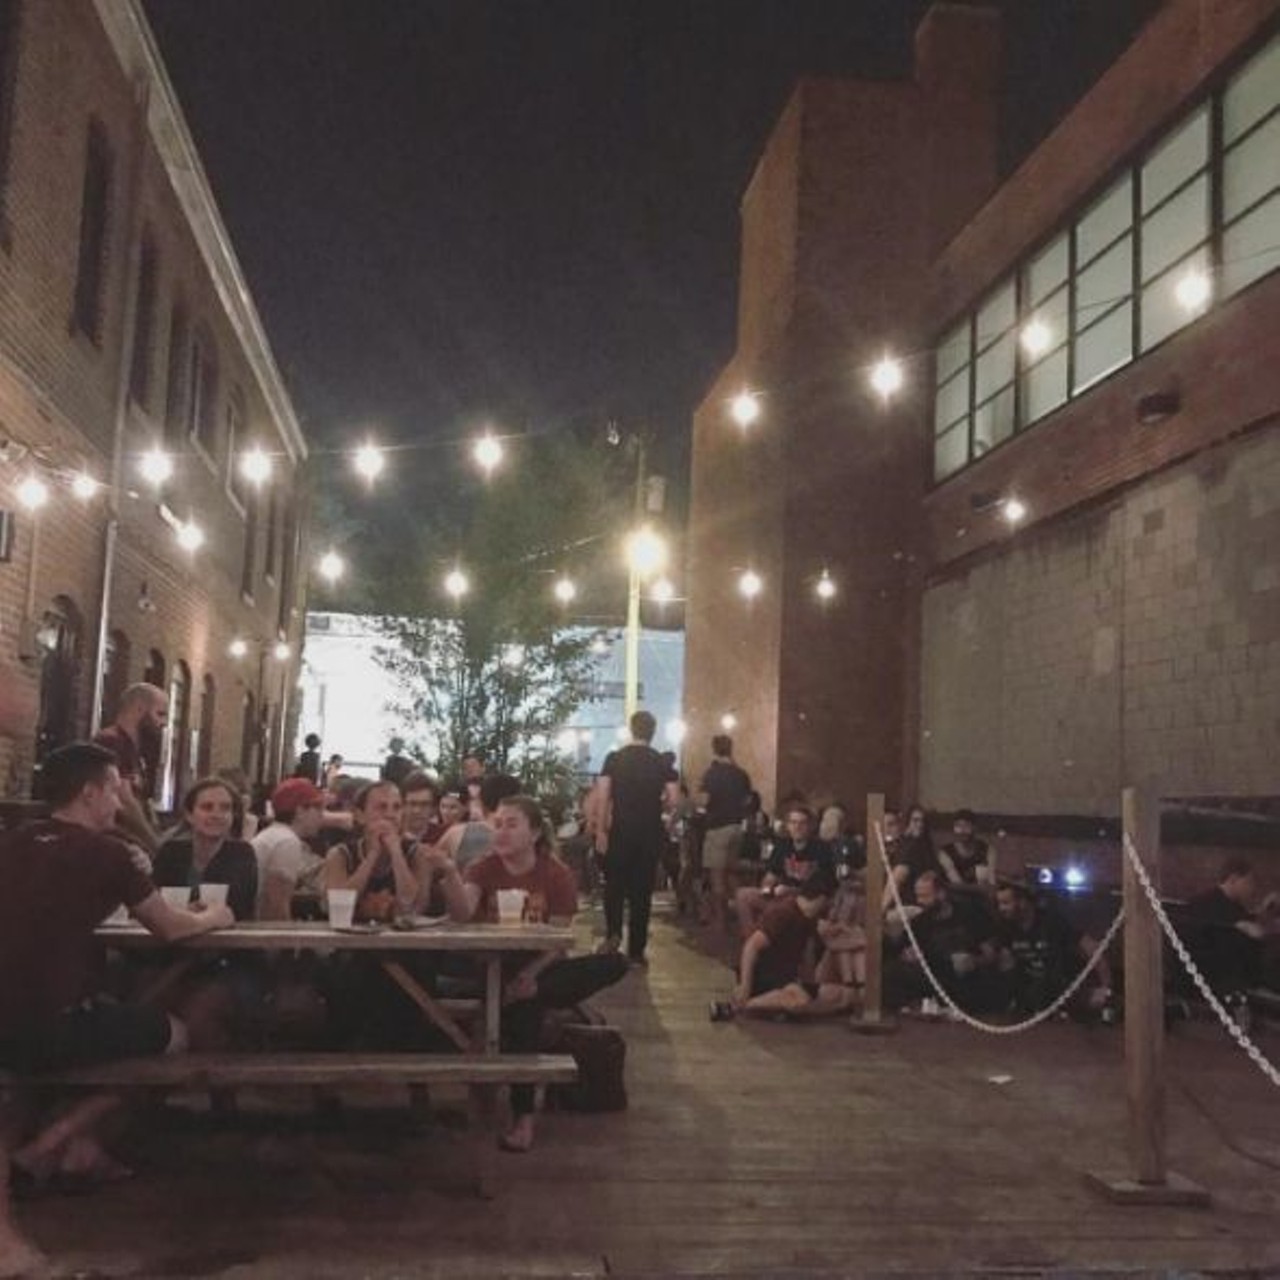  Jukebox
1404 W. 29th St., Cleveland
Why jam out to Jukebox's impressive rock repertoire inside, when you can now do so on their patio?
Photo via @jukeboxcle/Instagram